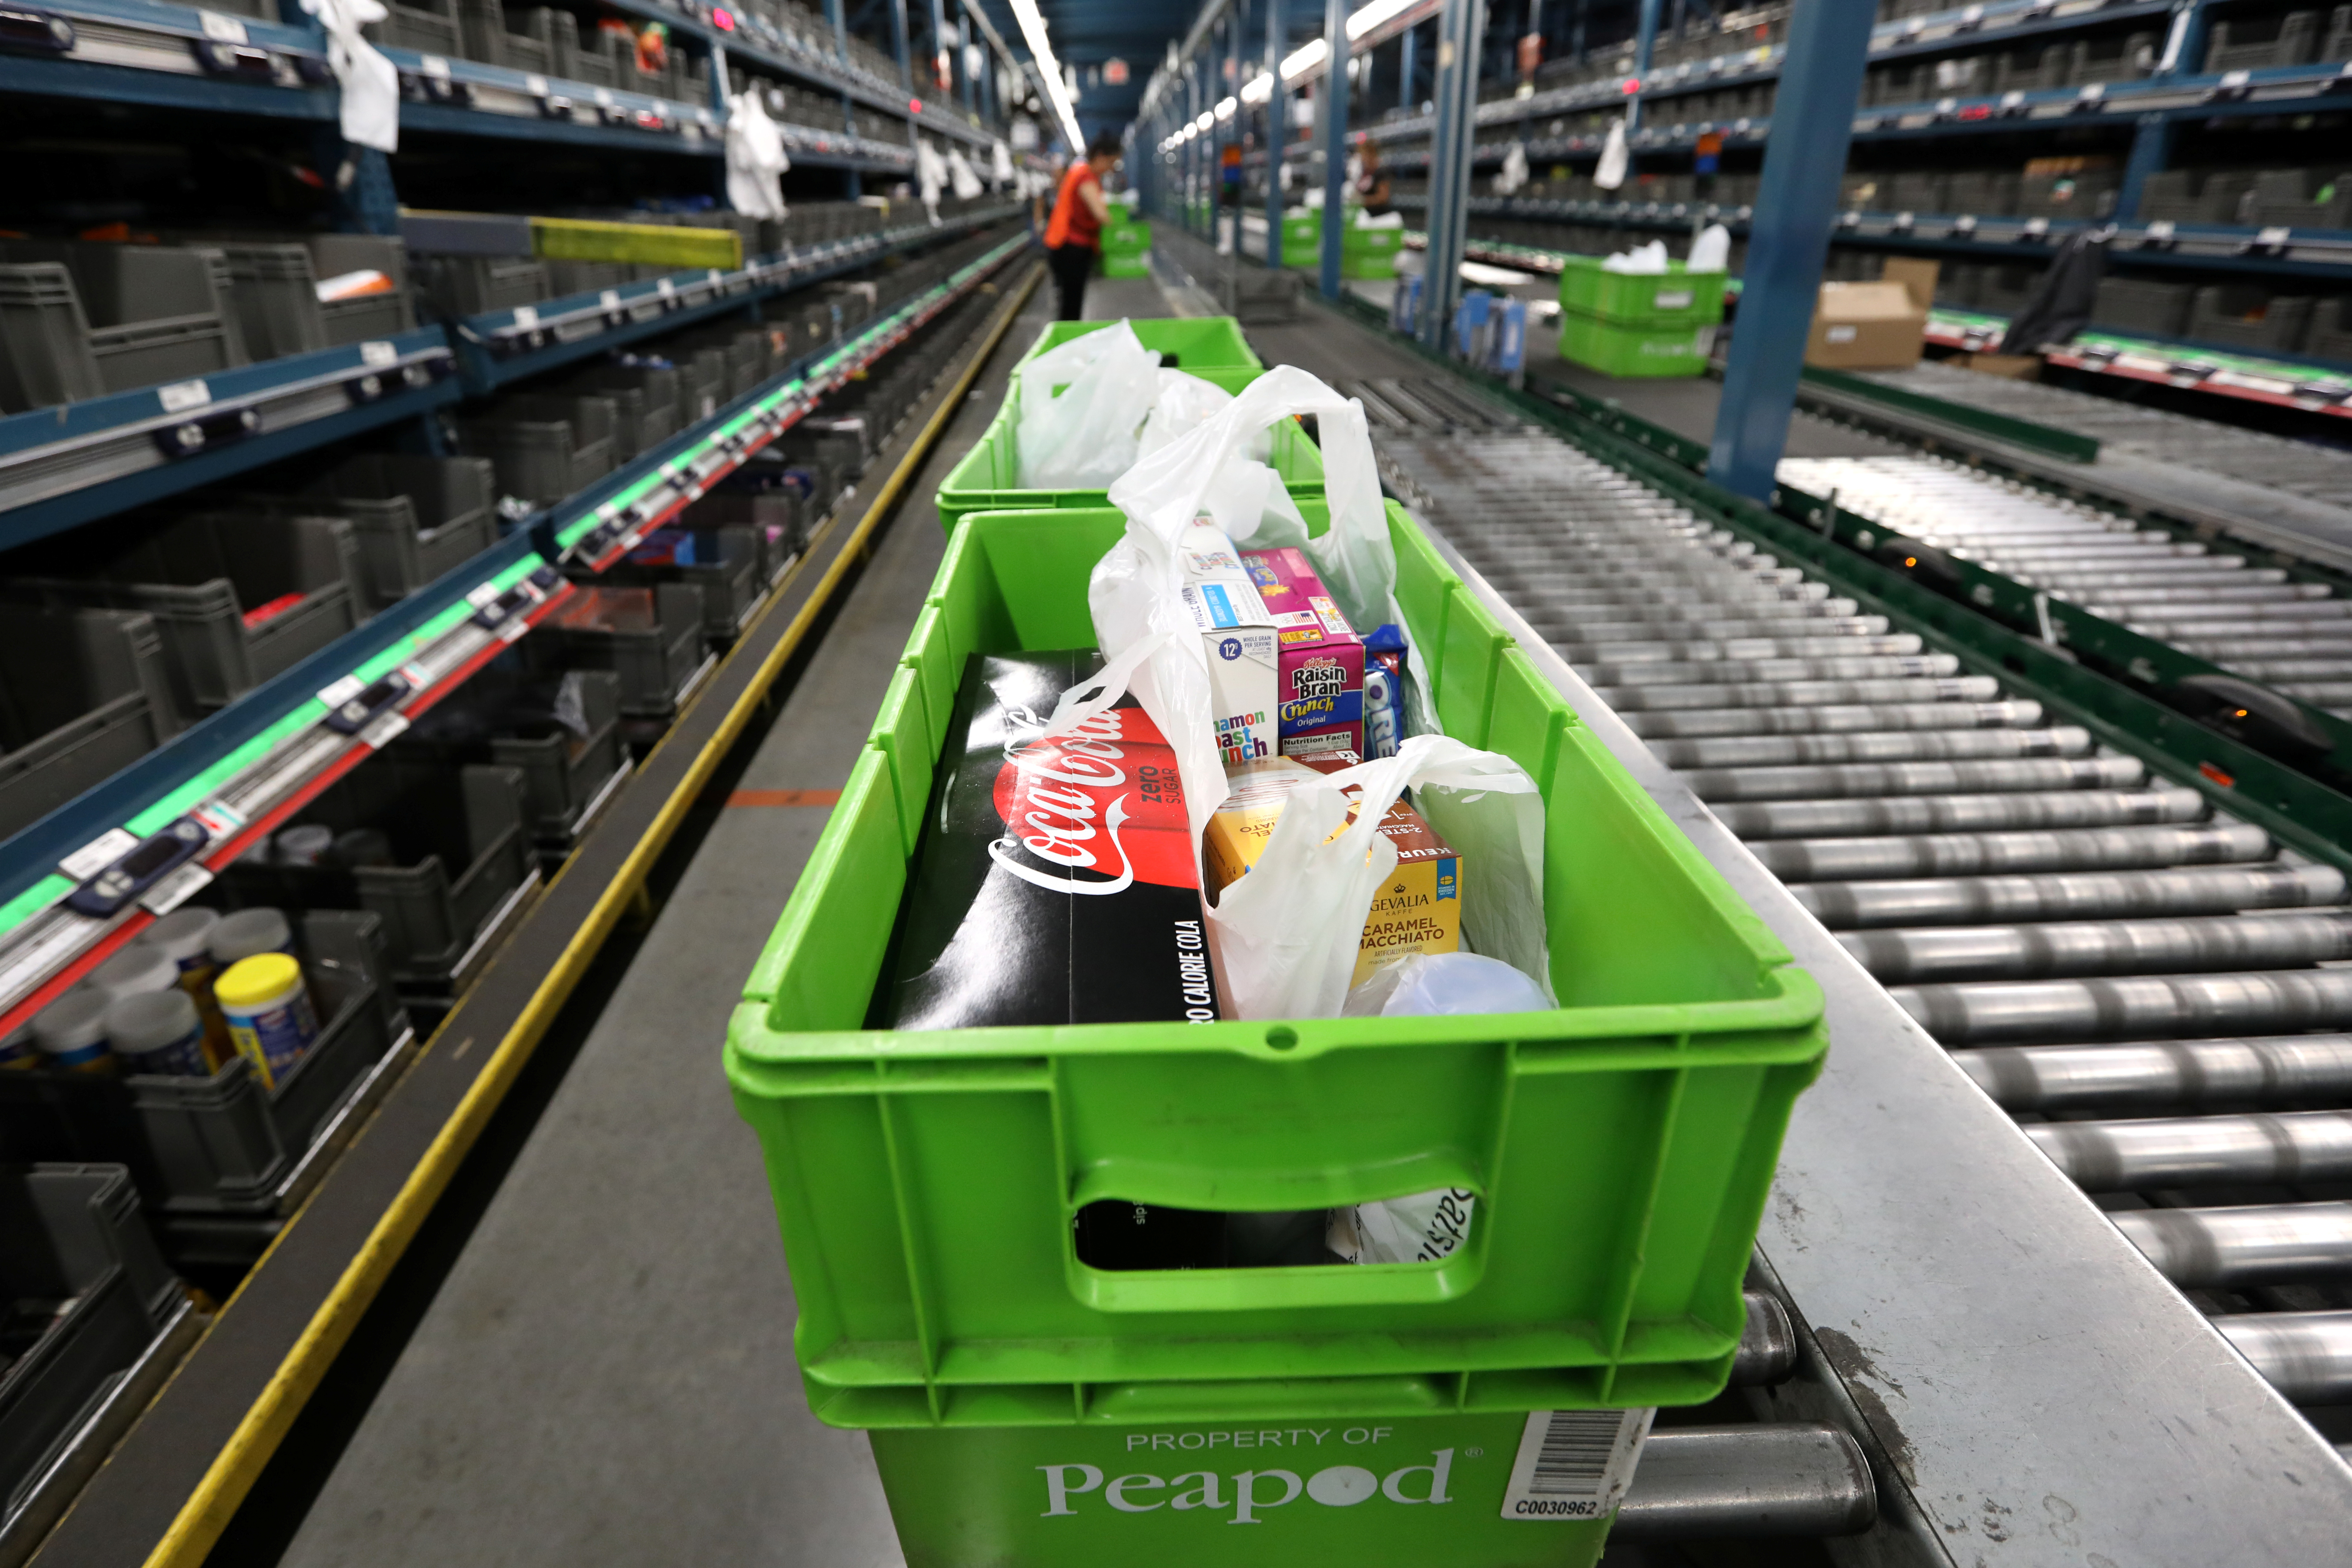 Groceries are seen packed in totes at a Peapod grocery distribution warehouse facility in Jersey City